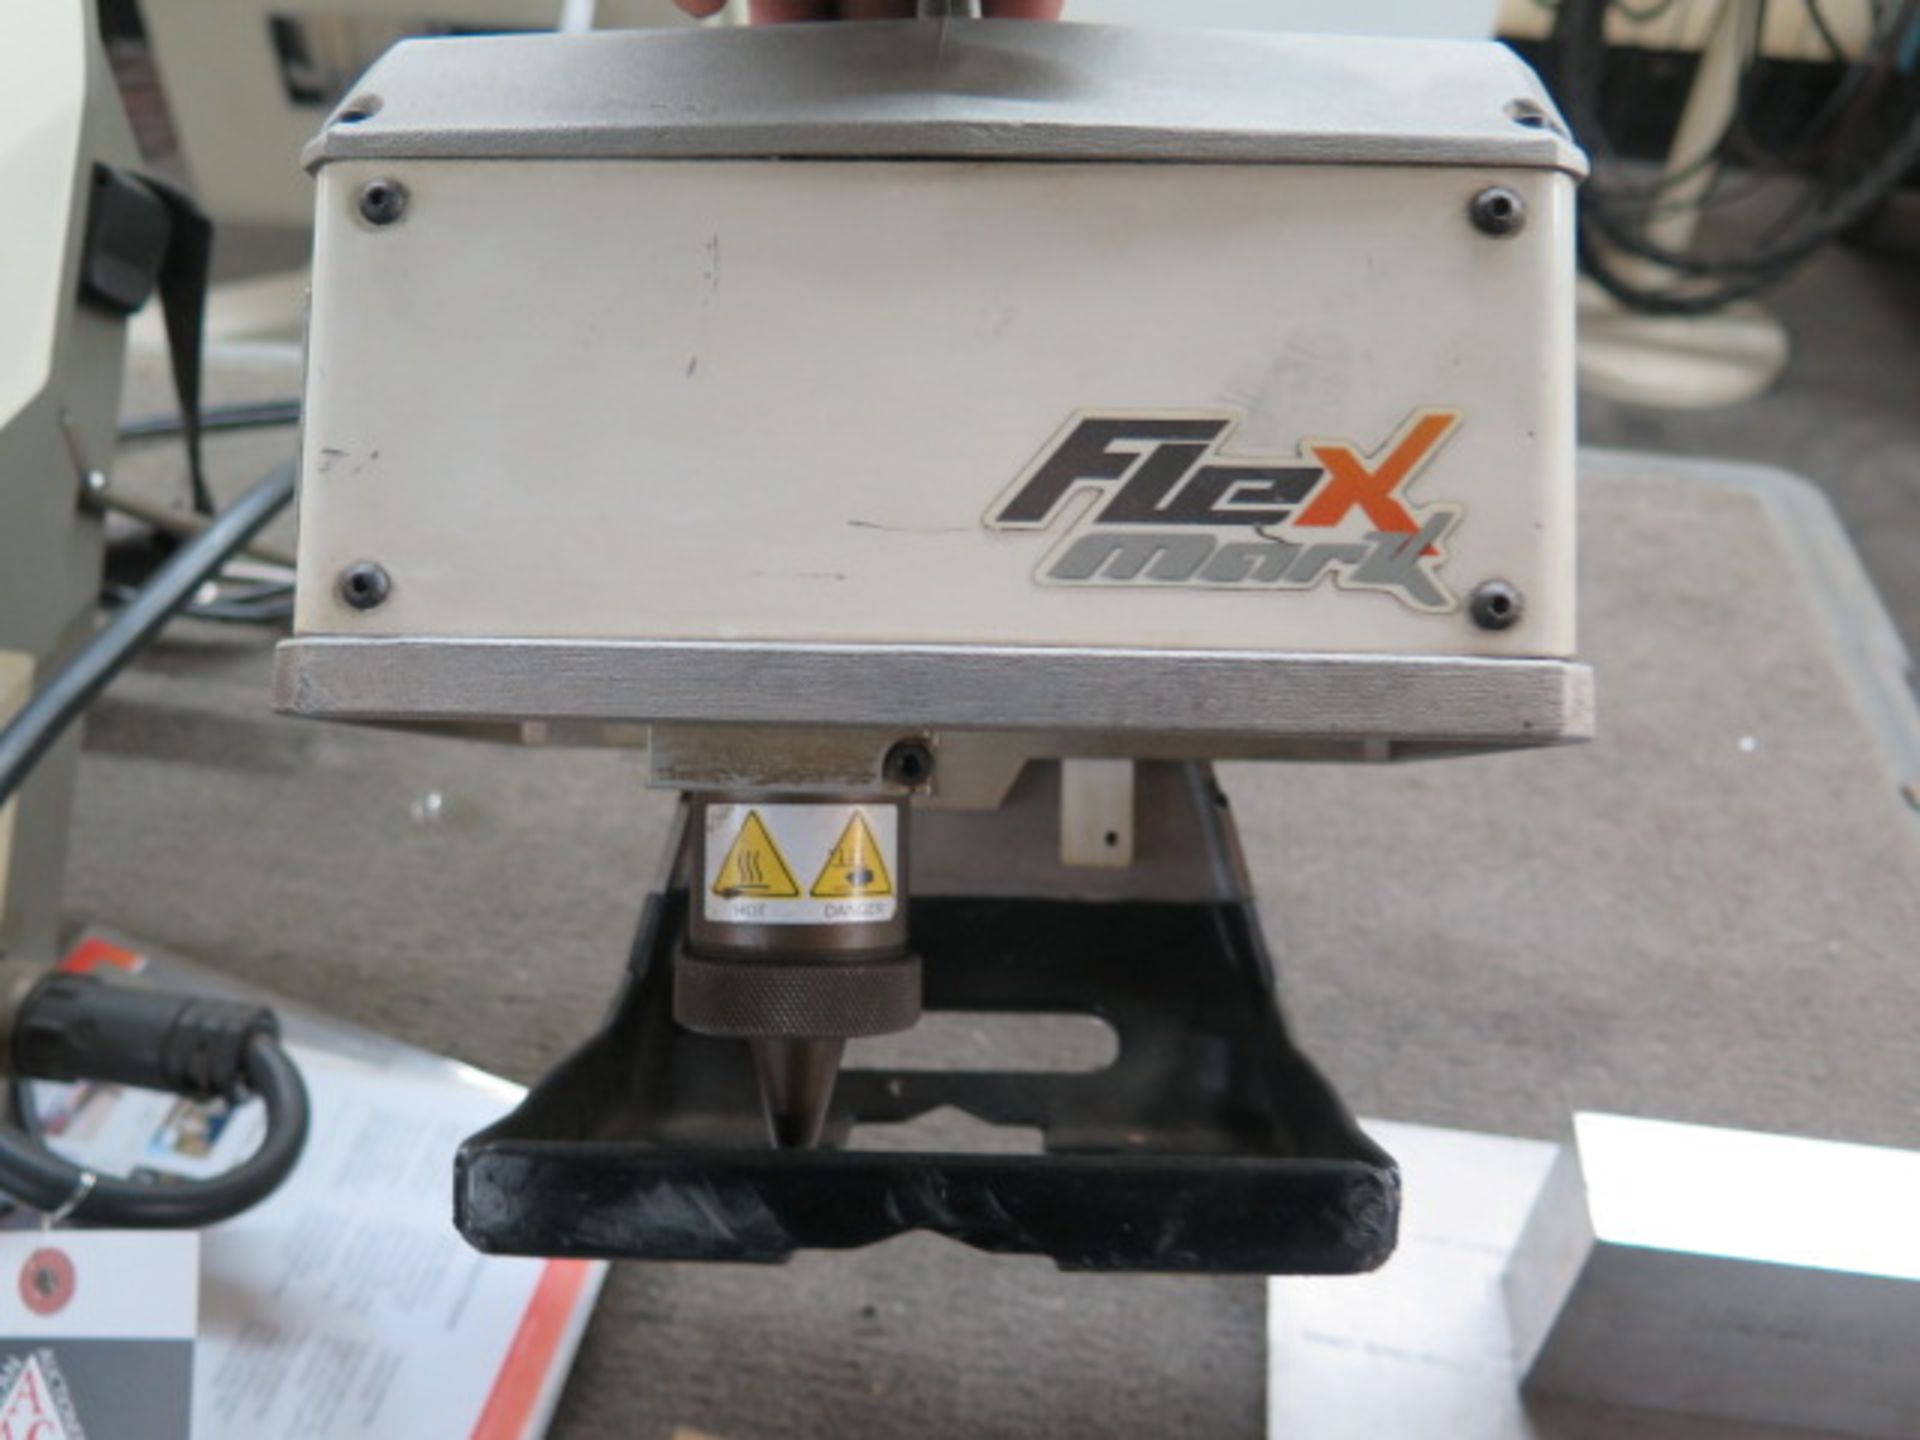 2013 Dapra Marking Systems “Flex Mark” Peen Engraving System w/ PLC Controls, SOLD AS IS - Image 3 of 8